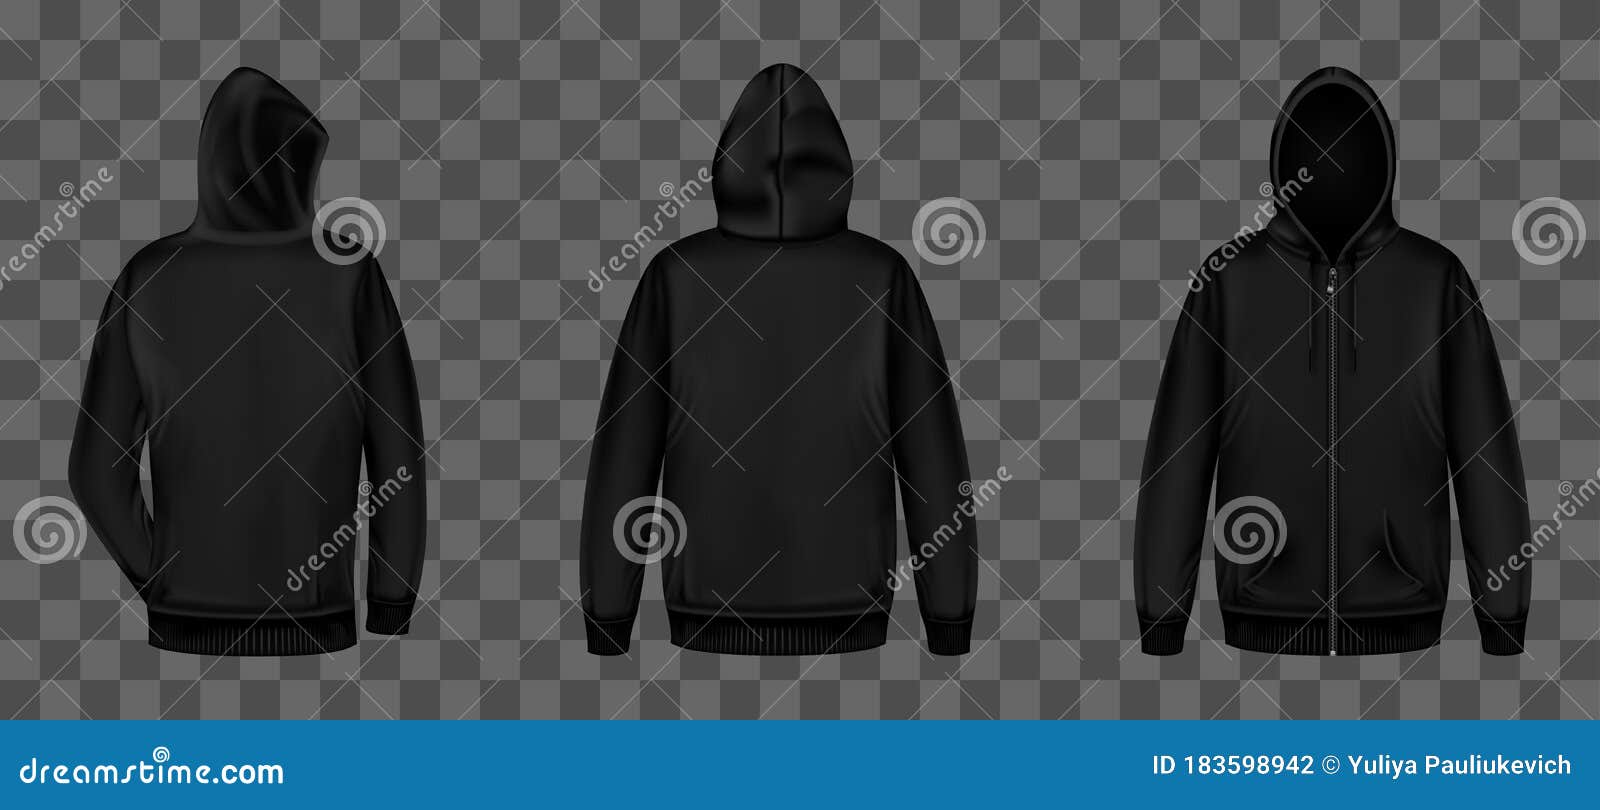 Download Black Sweatshirt With Zipper Front And Back View Stock ...